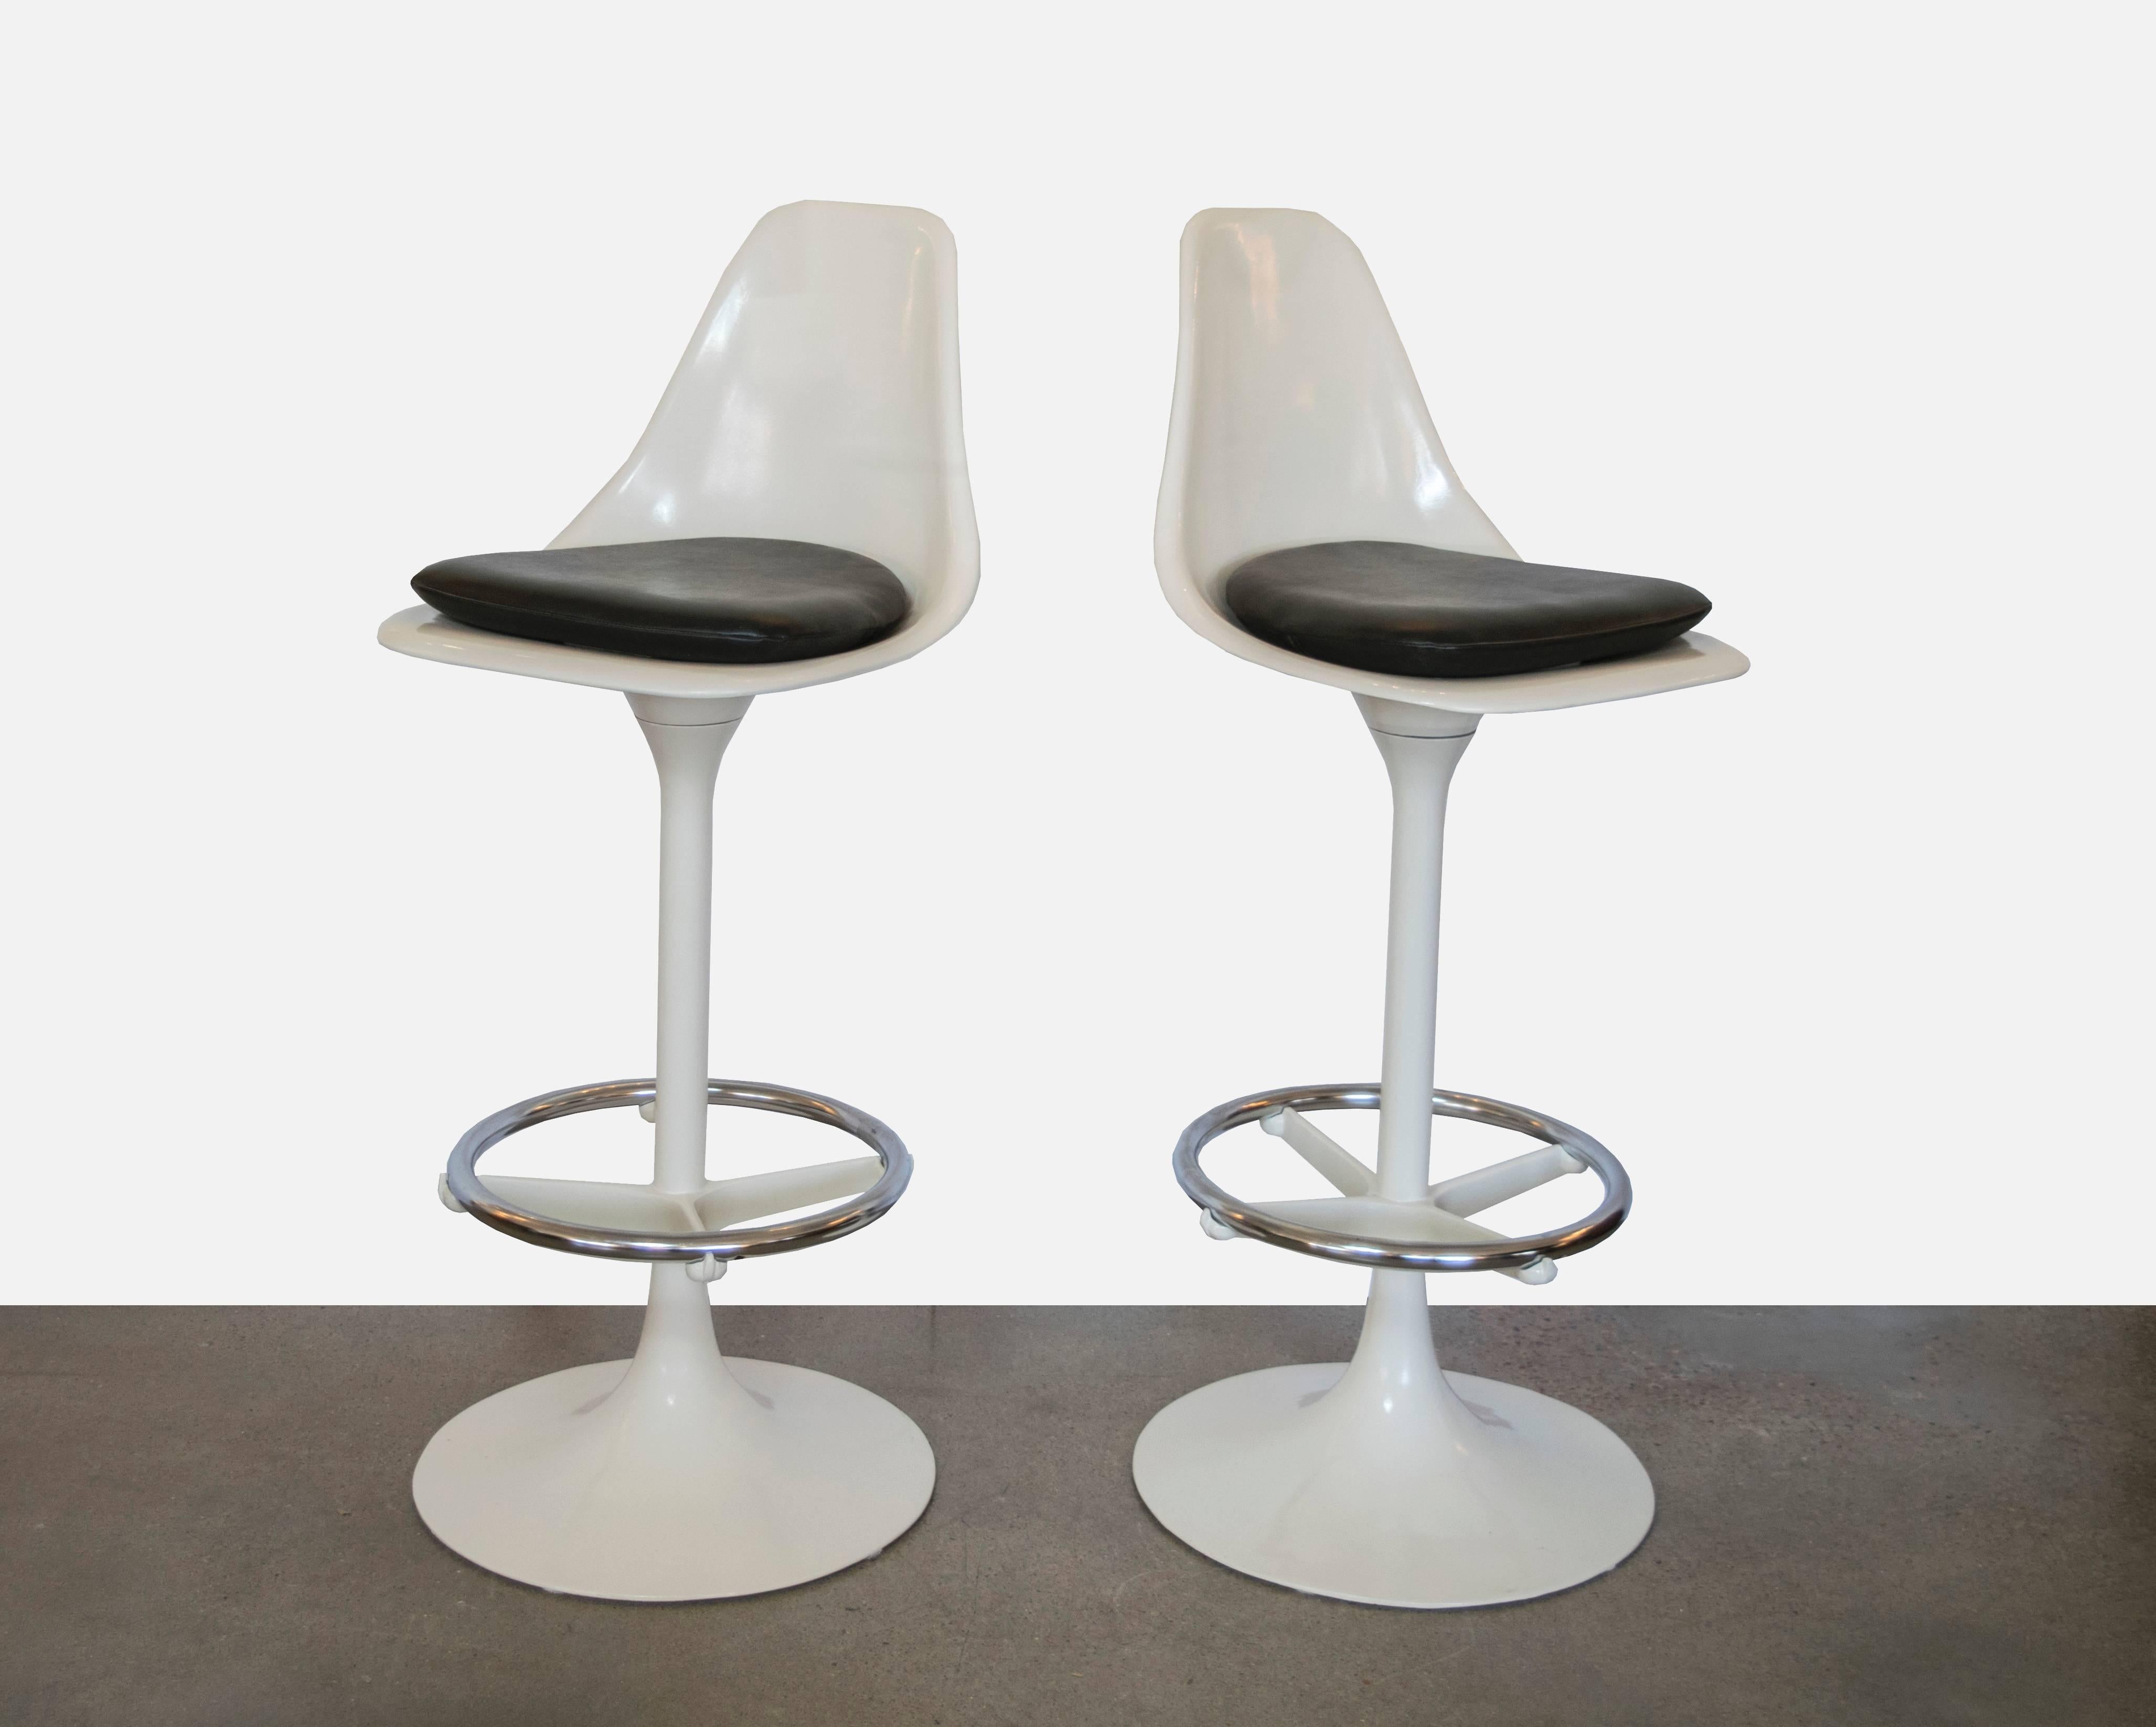 There weren't many of these tulip chairs made in bar stool height. We don't believe they were manufactured by Knoll but they're Classic Saarinen design from the 1960s.